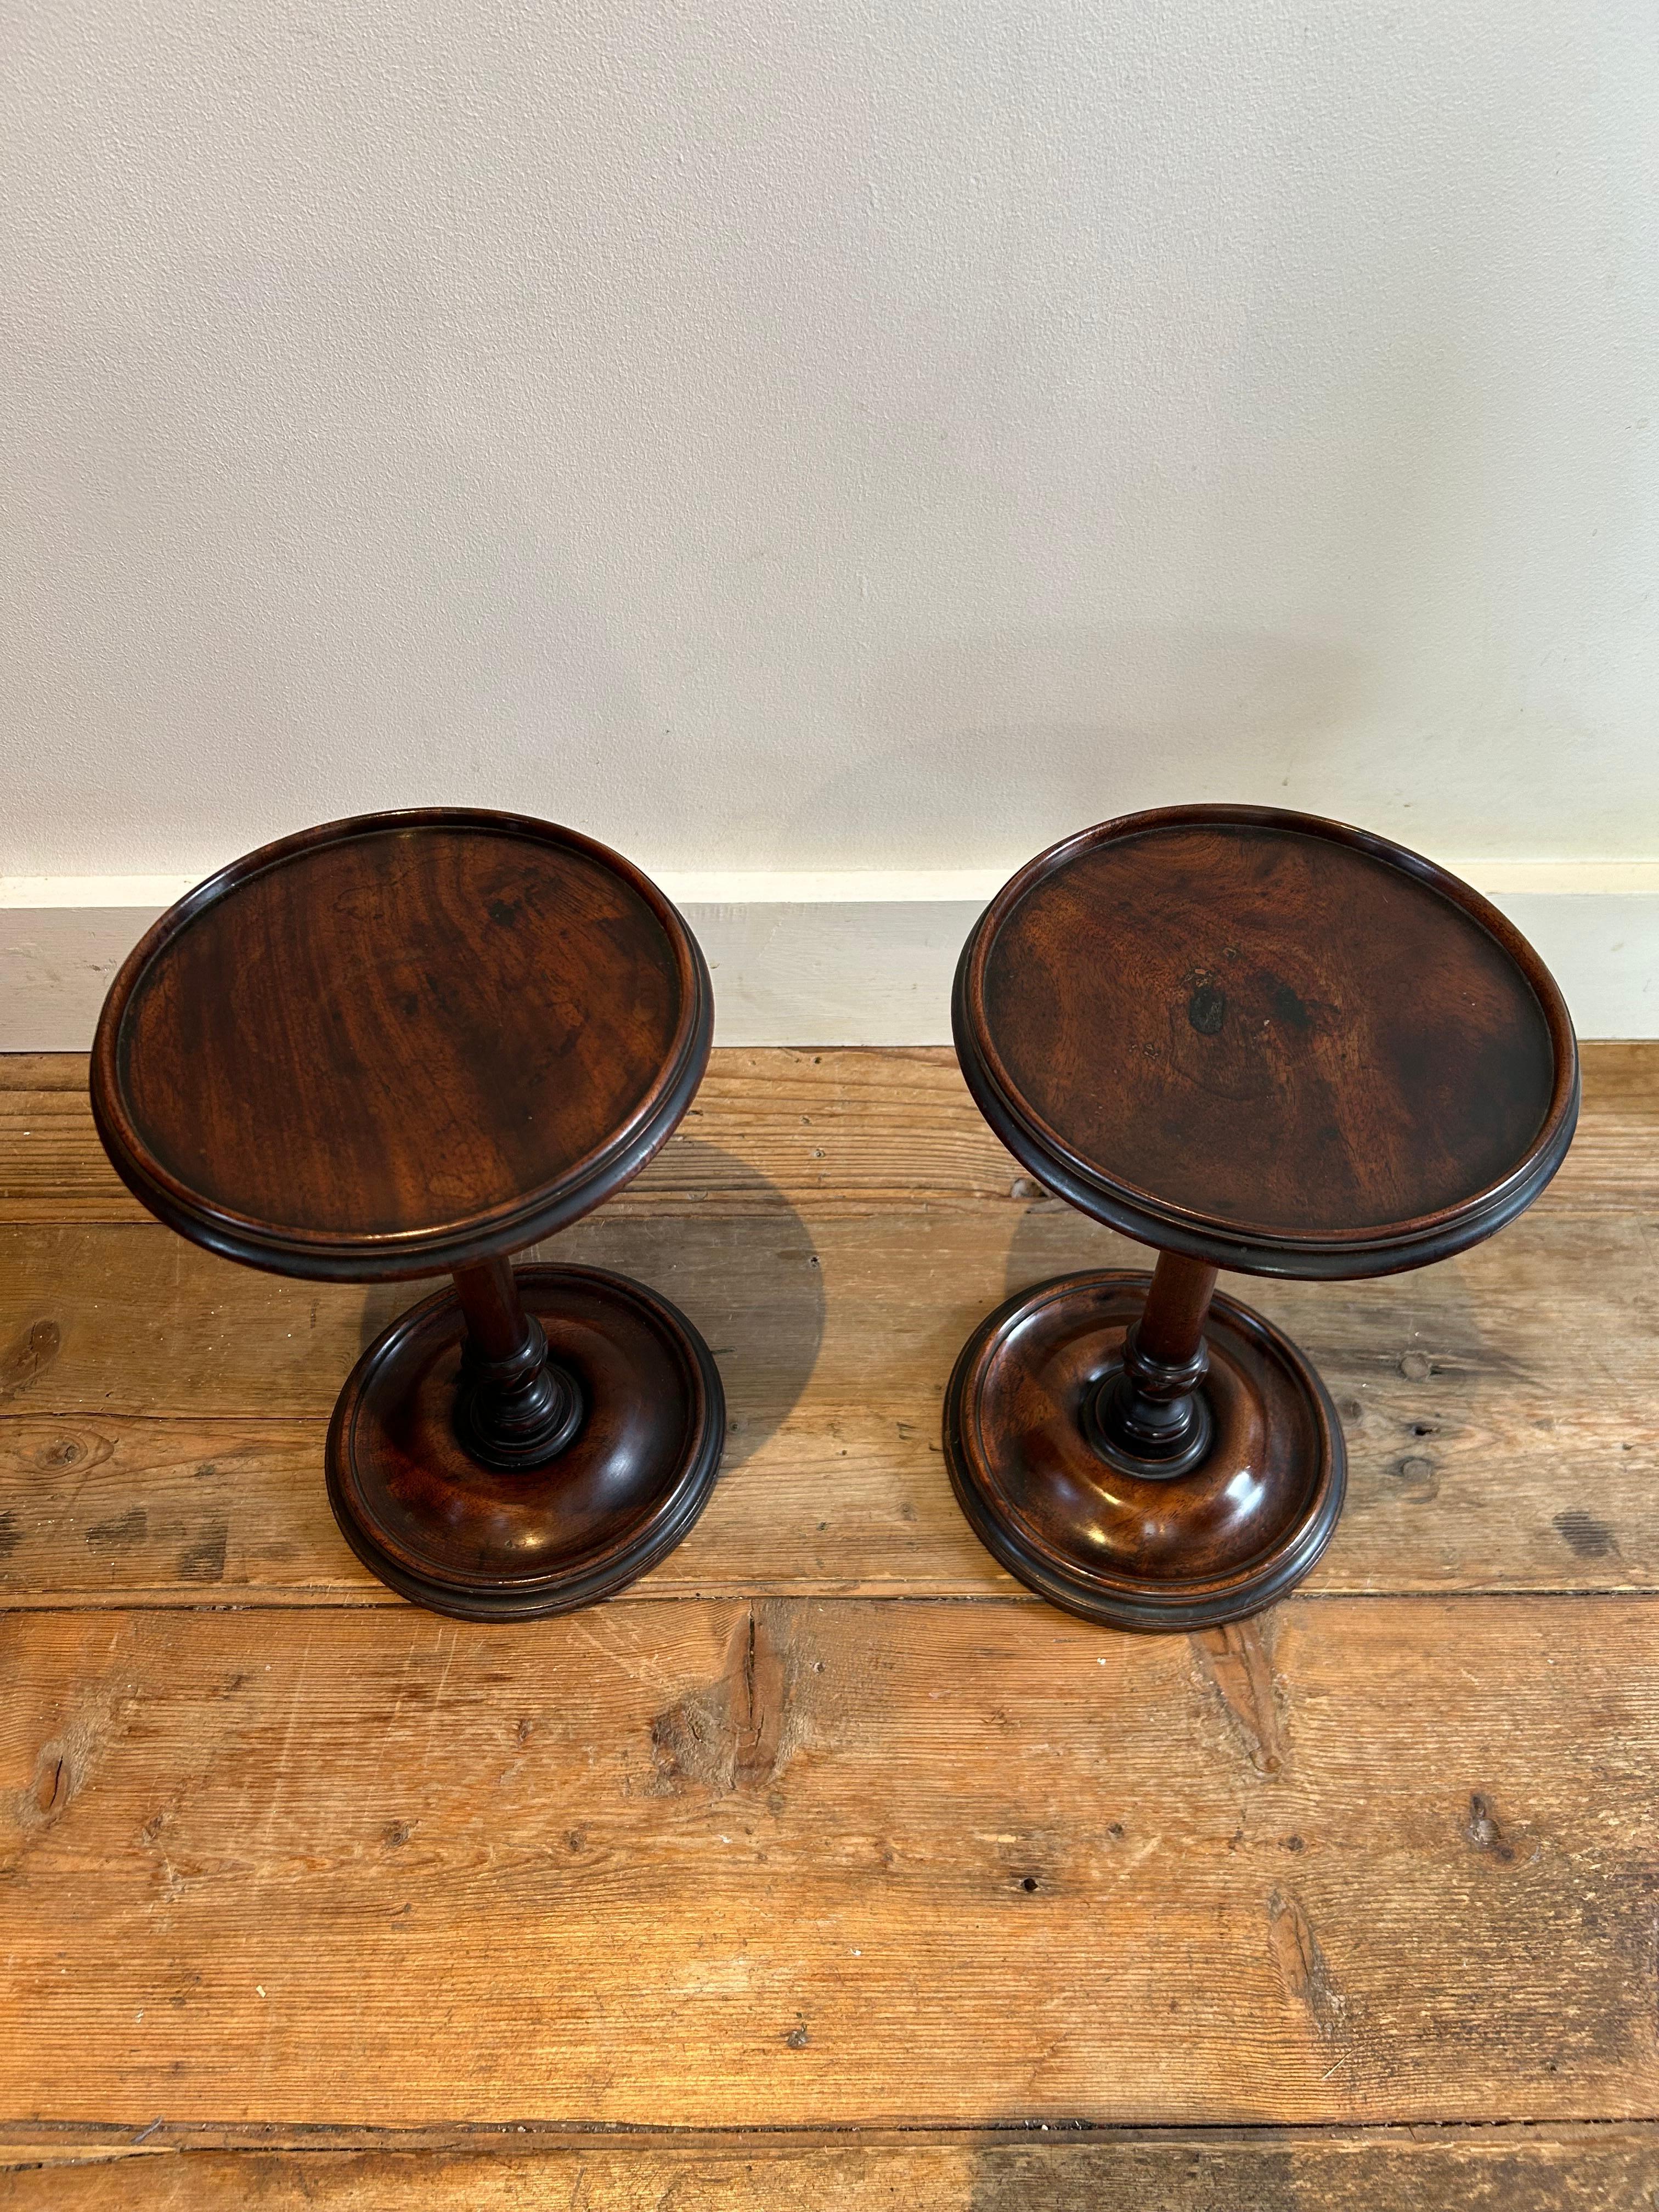 Pair of English mahogany candle stands, circa 1760 with circular lipped top sitting on a rhythm fluted turned baluster column, ending on a turned moulded lead waited base. These sweet candle stands have their original slightly worn baize, they are